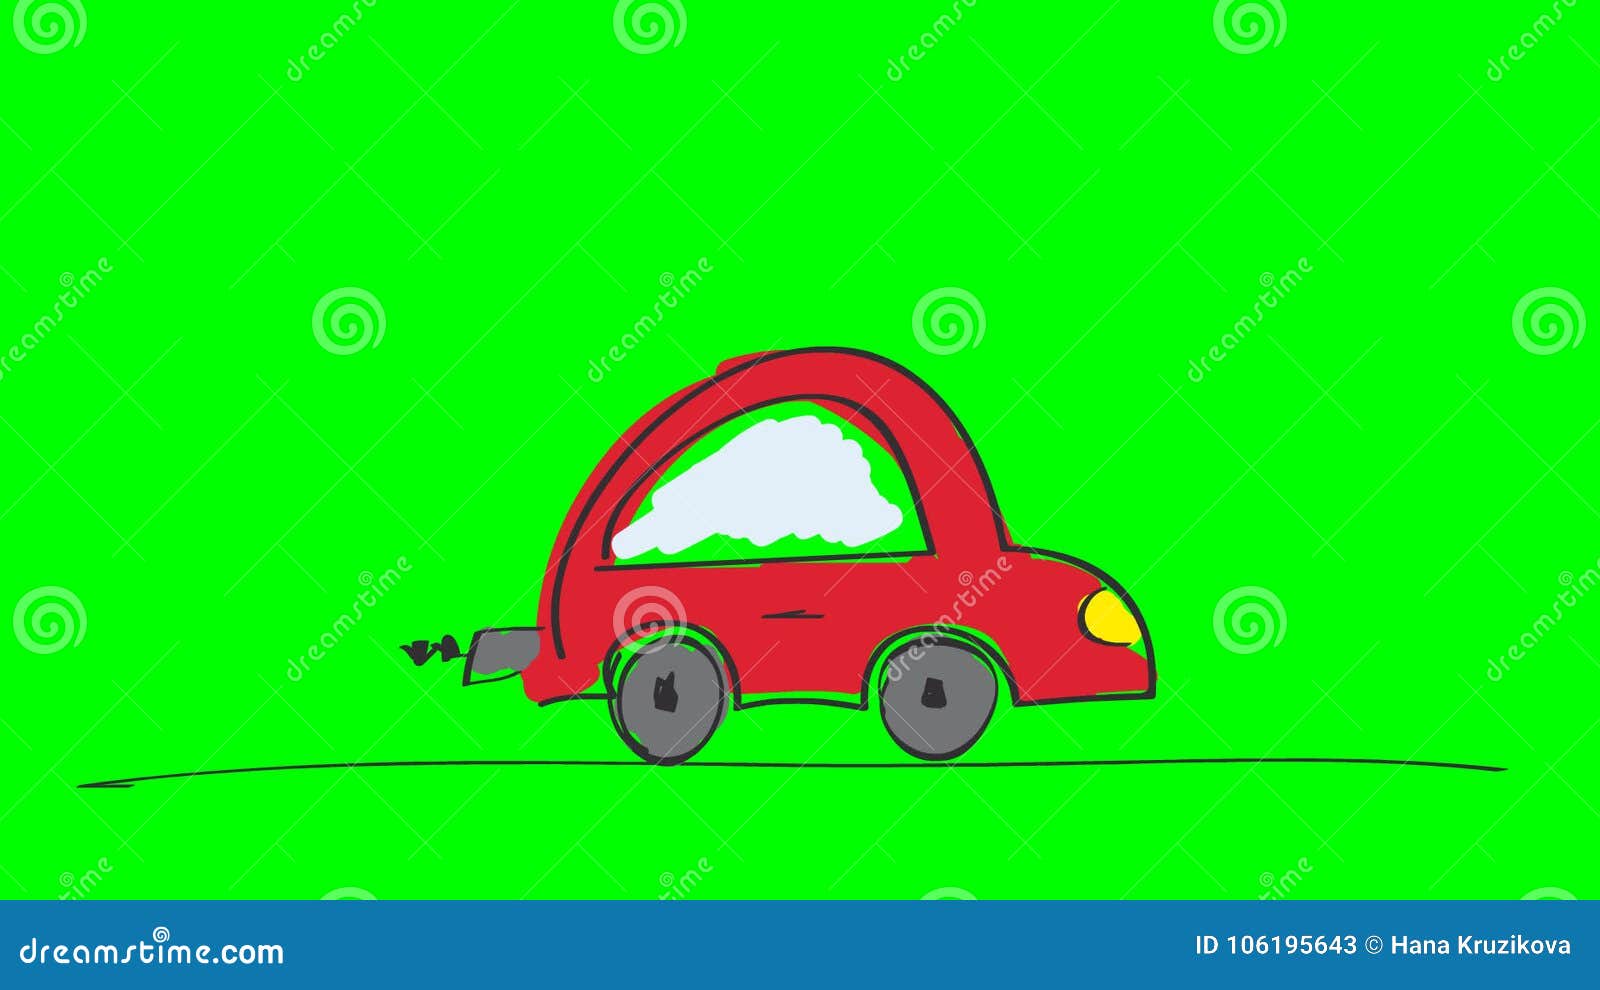 Animation of Red Car, Animated Hand Drawn Cartoon Illustration, Loop Able,  on Chroma Key Green Screen Background. Stock Video - Video of cartoon,  animated: 106195643